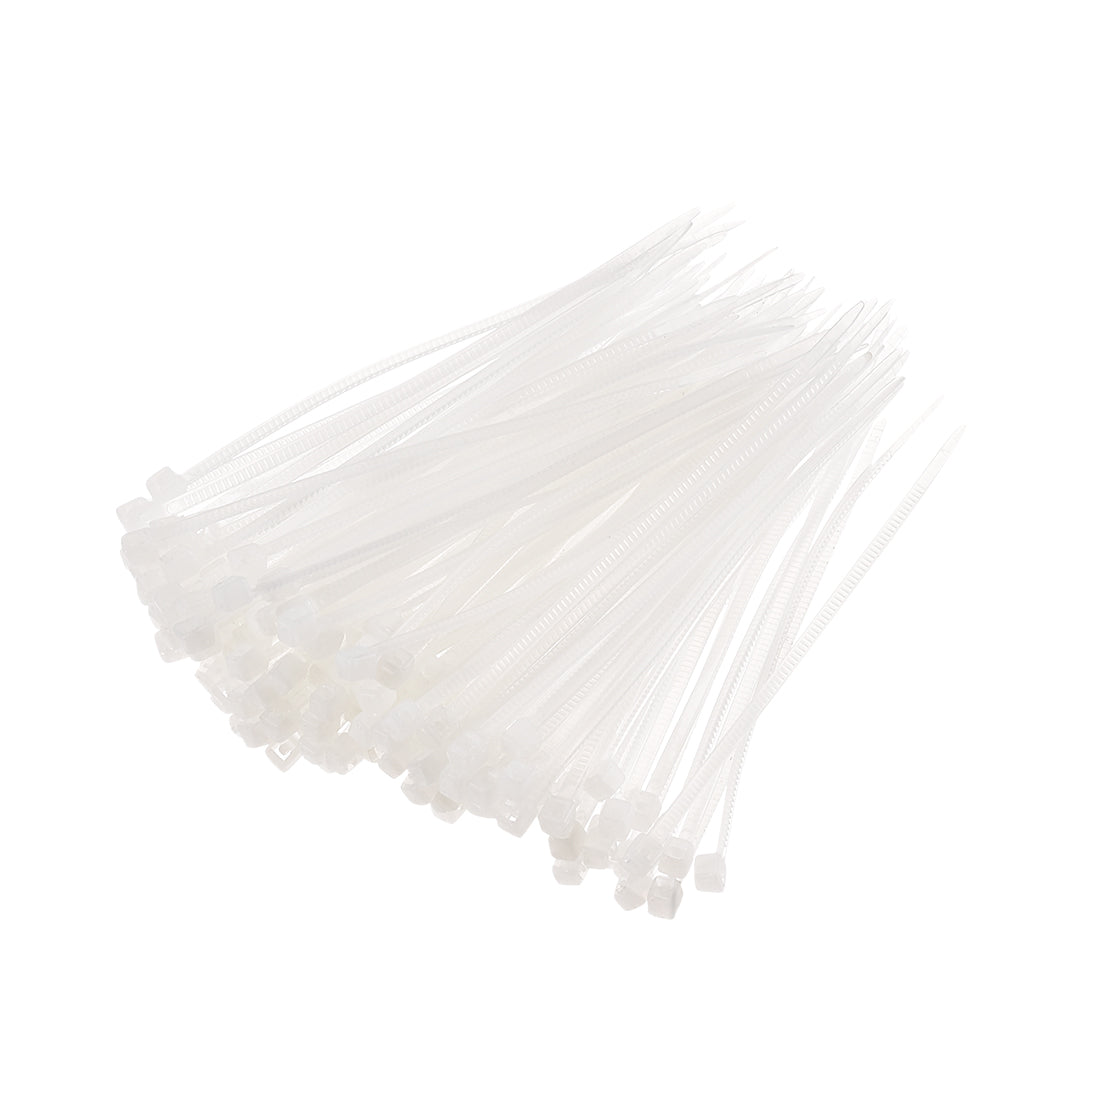 uxcell Uxcell Cable Zip Ties 80mmx1.8mm Self-Locking Nylon Tie Wraps White 700pcs